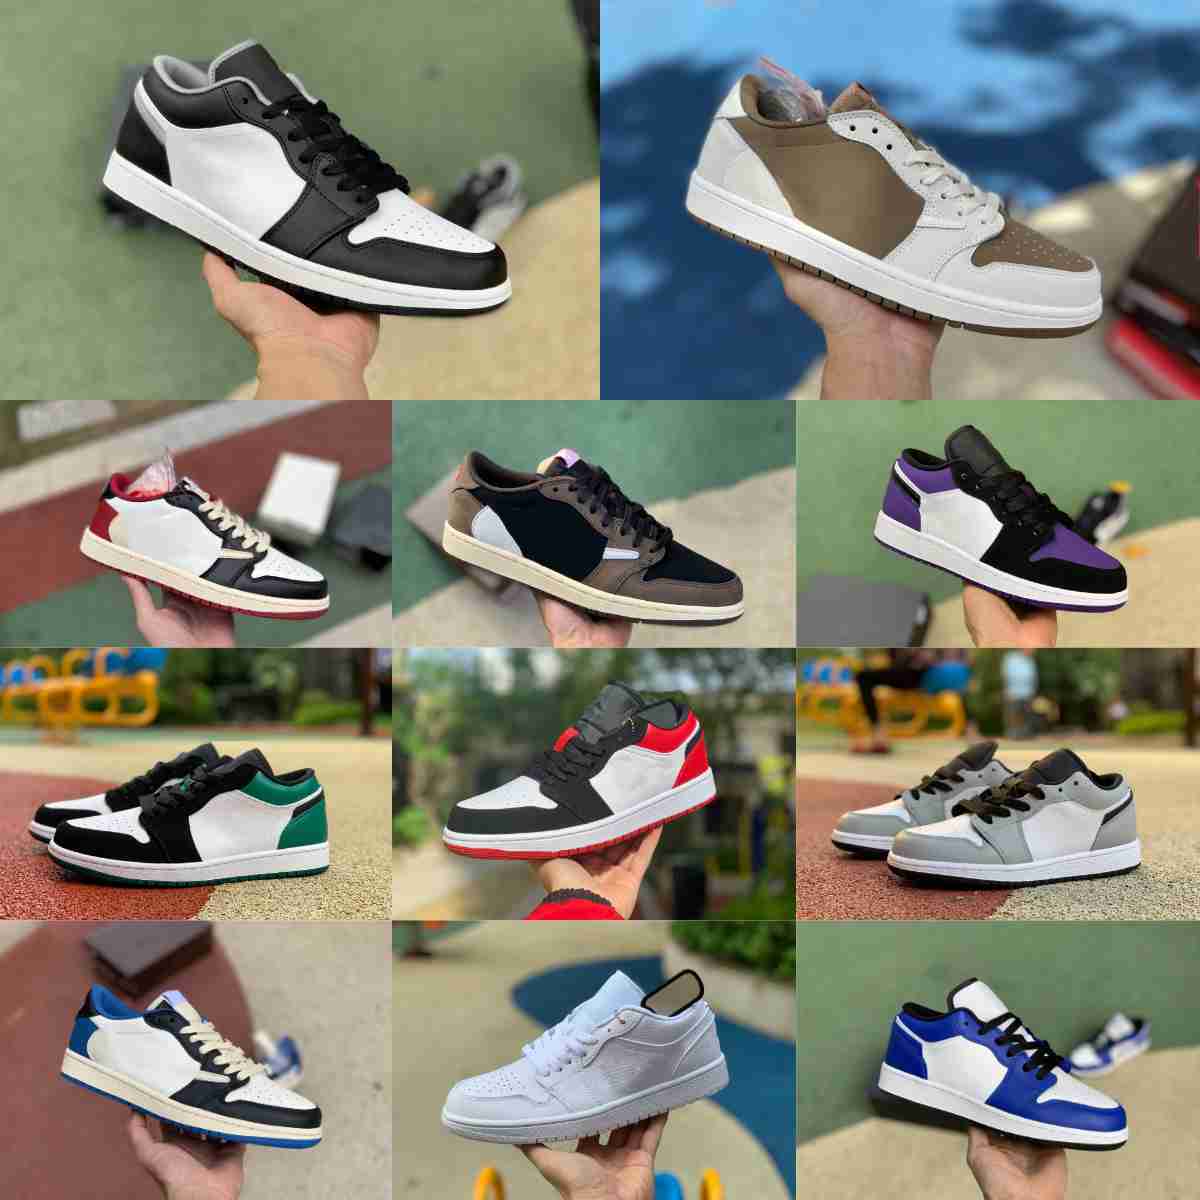 

2023 Fragment TS Jumpman X 1 1S Low Basketball Shoes UNC Court Purple Black Shadow Panda Emerald Mystic Green White Brown Red Gold Grey Toe Designer Sports Sneakers, Please contact us